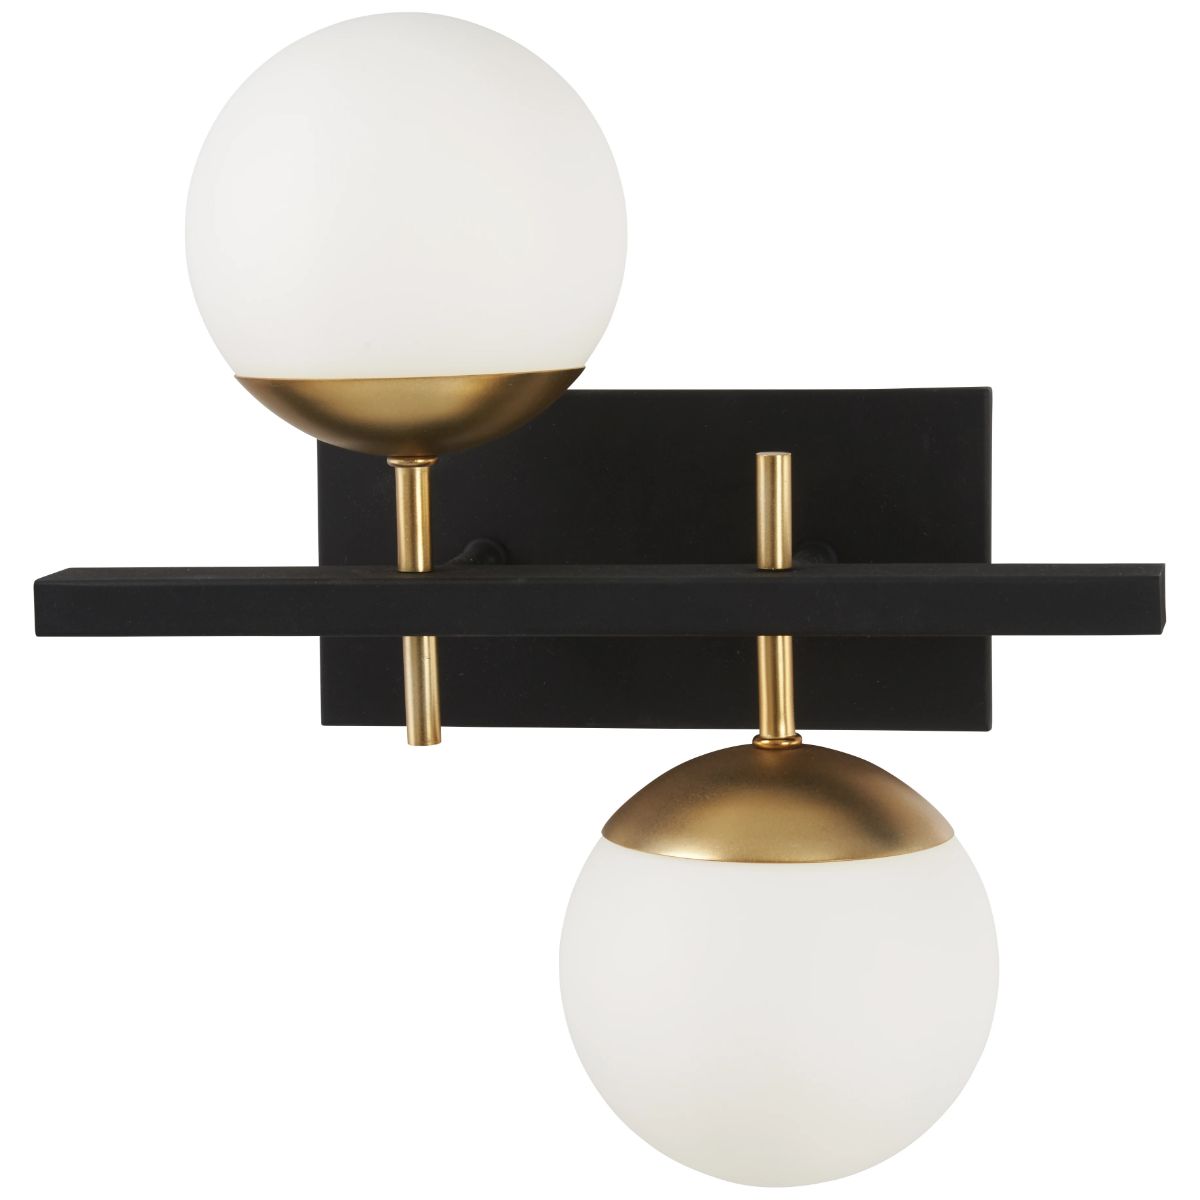 Alluria 16 in. Armed Sconce Black & Gold finish - Bees Lighting